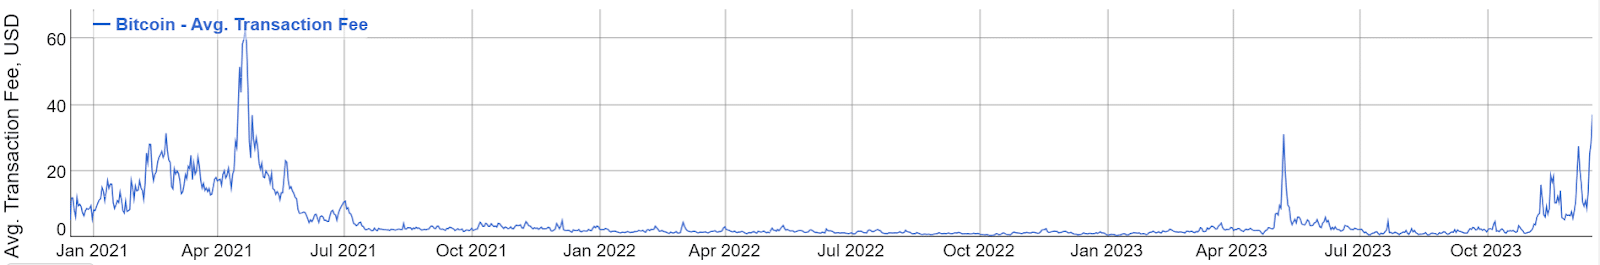 Bitcoin average transaction fees from 2021 to 2023